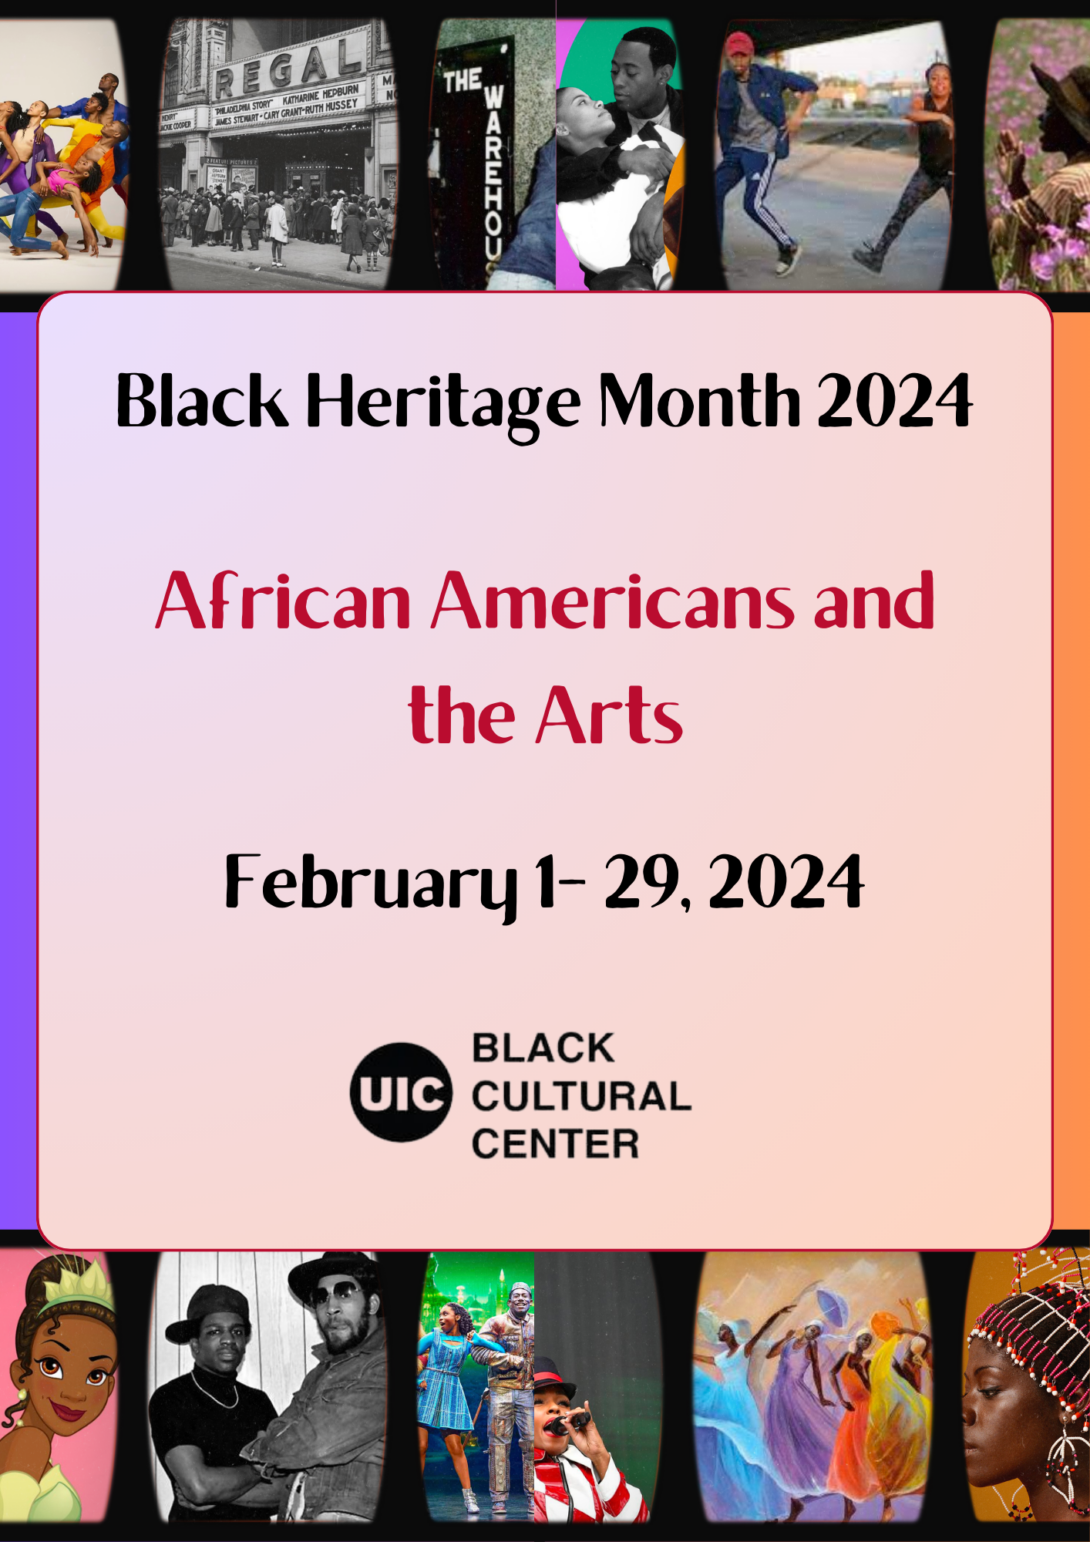 Black Heritage Month 2024. Theme: African Americans and the Arts. February 1-29, 2024